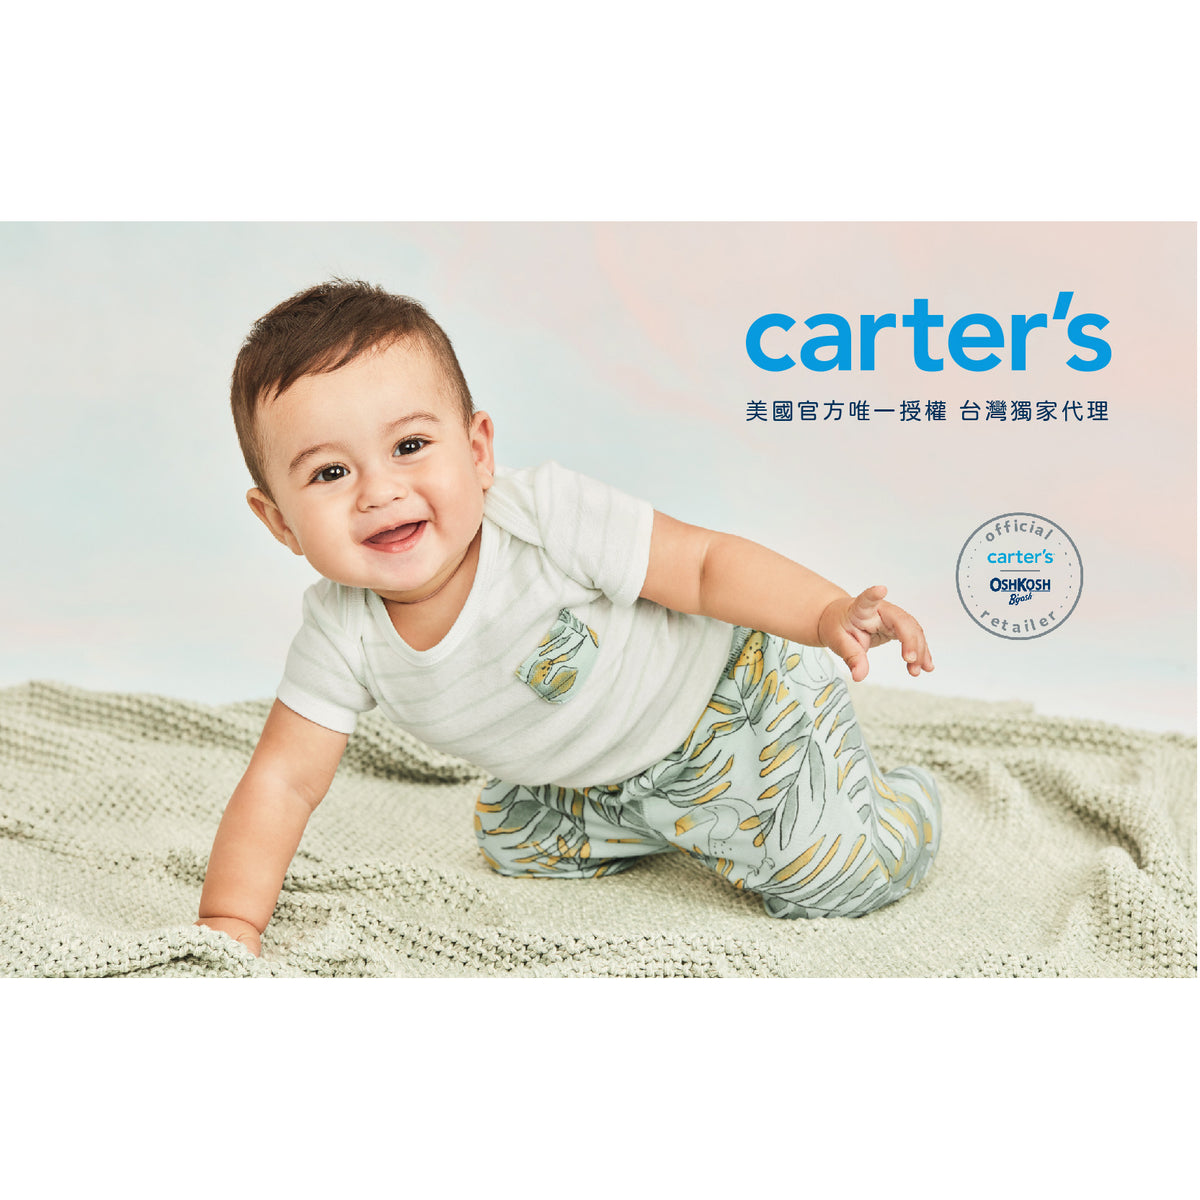 Carter's Best Friend 4-piece set of same-colored buttsuits (6M-24M)